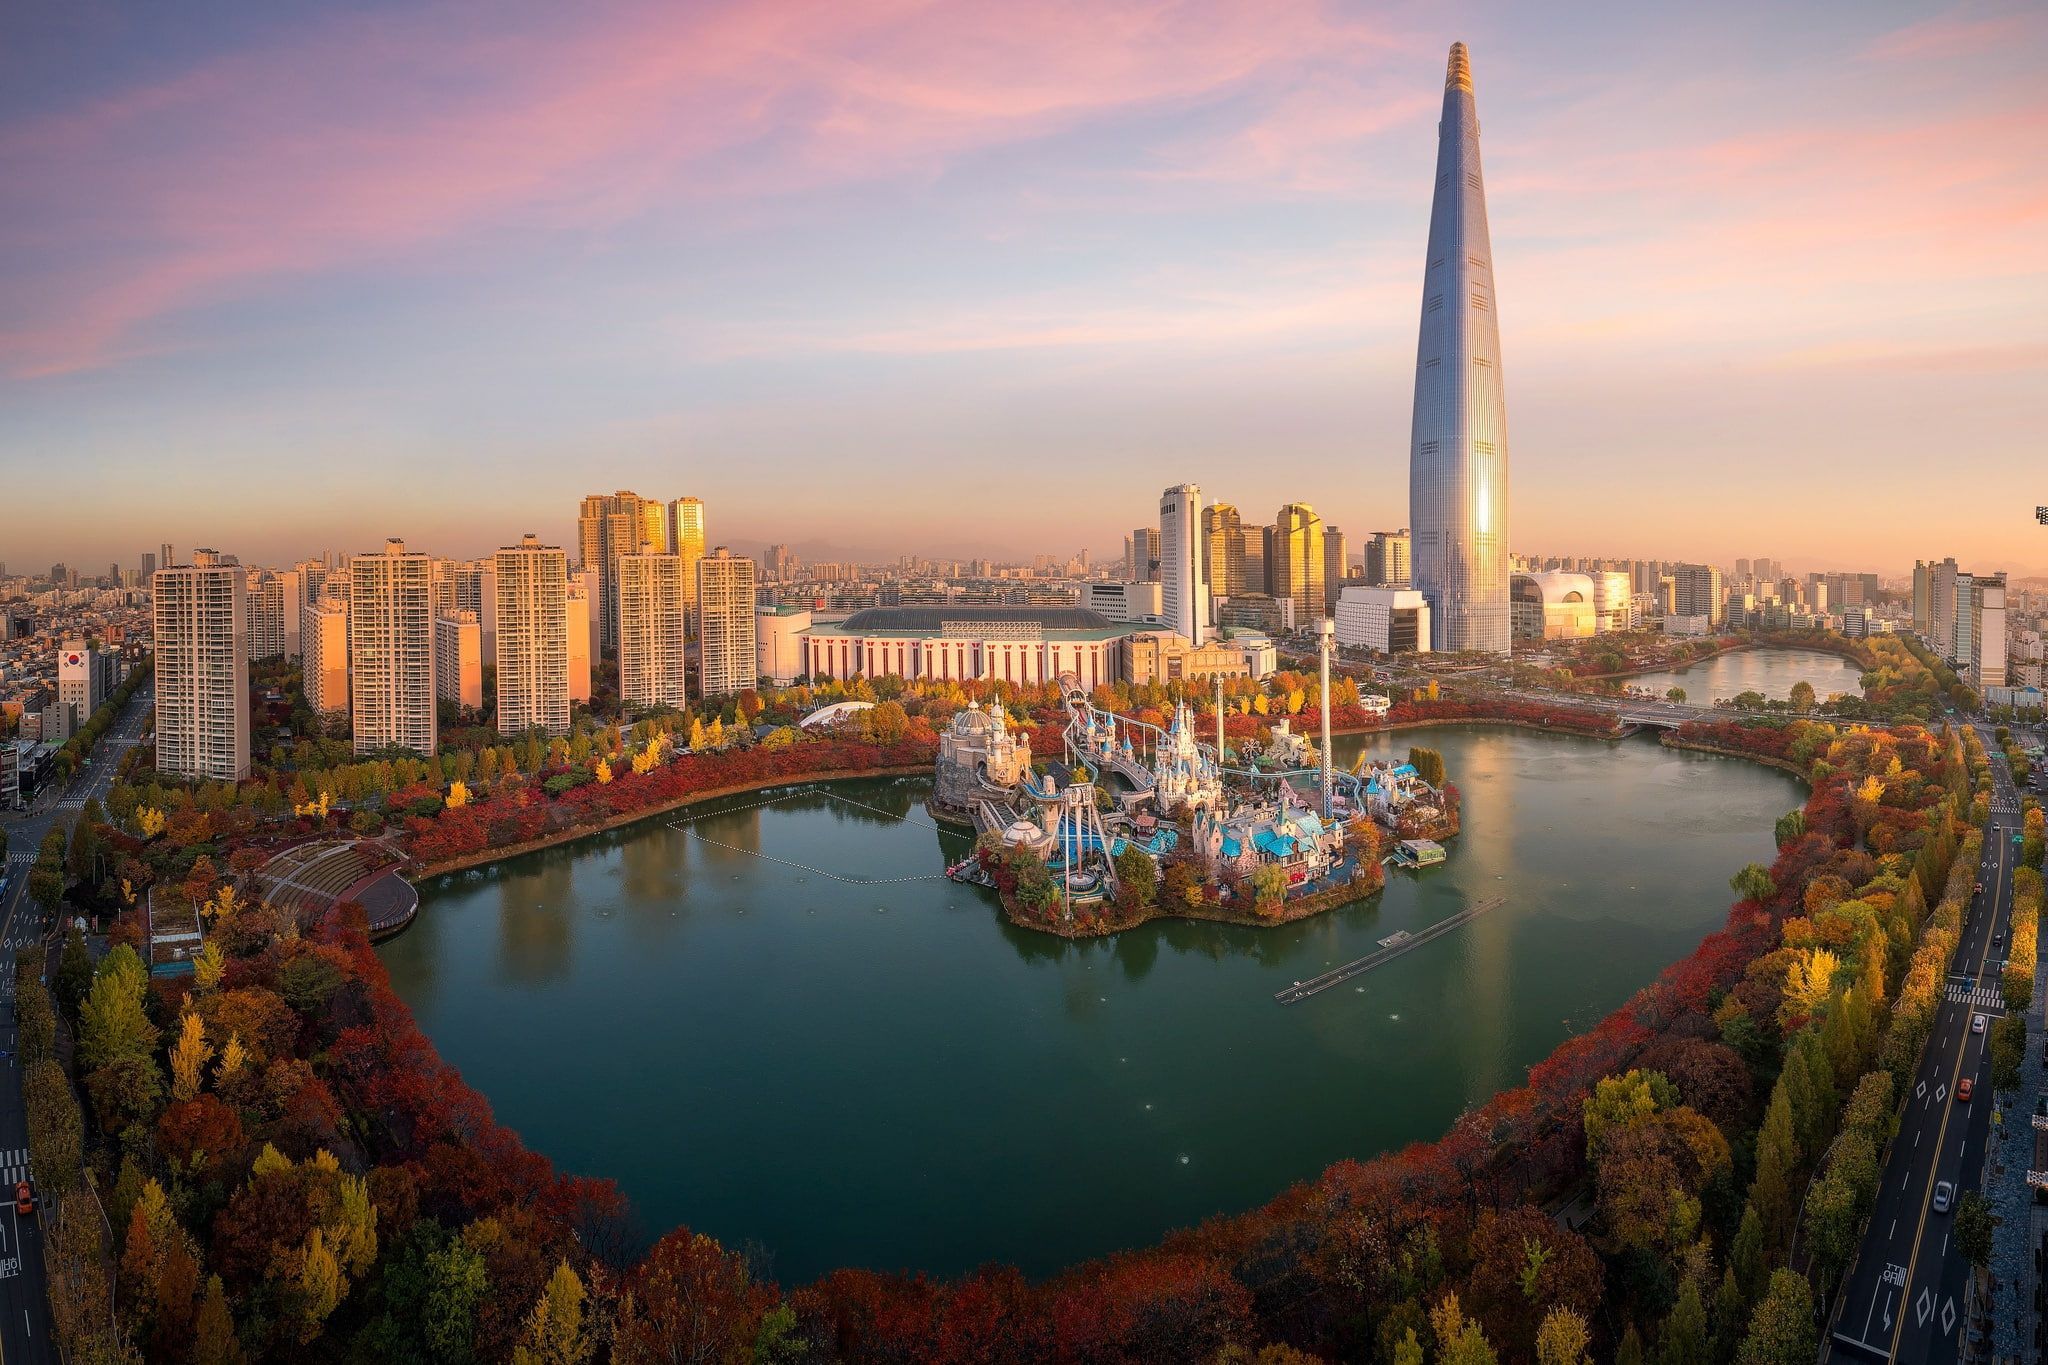 autumn #lake #Park #building #tower #home South Korea #Seoul #Seoul South Korea N Seoul tower Namsan Seoul Tower Lotte Wo. Travel points, Asia photography, Seoul